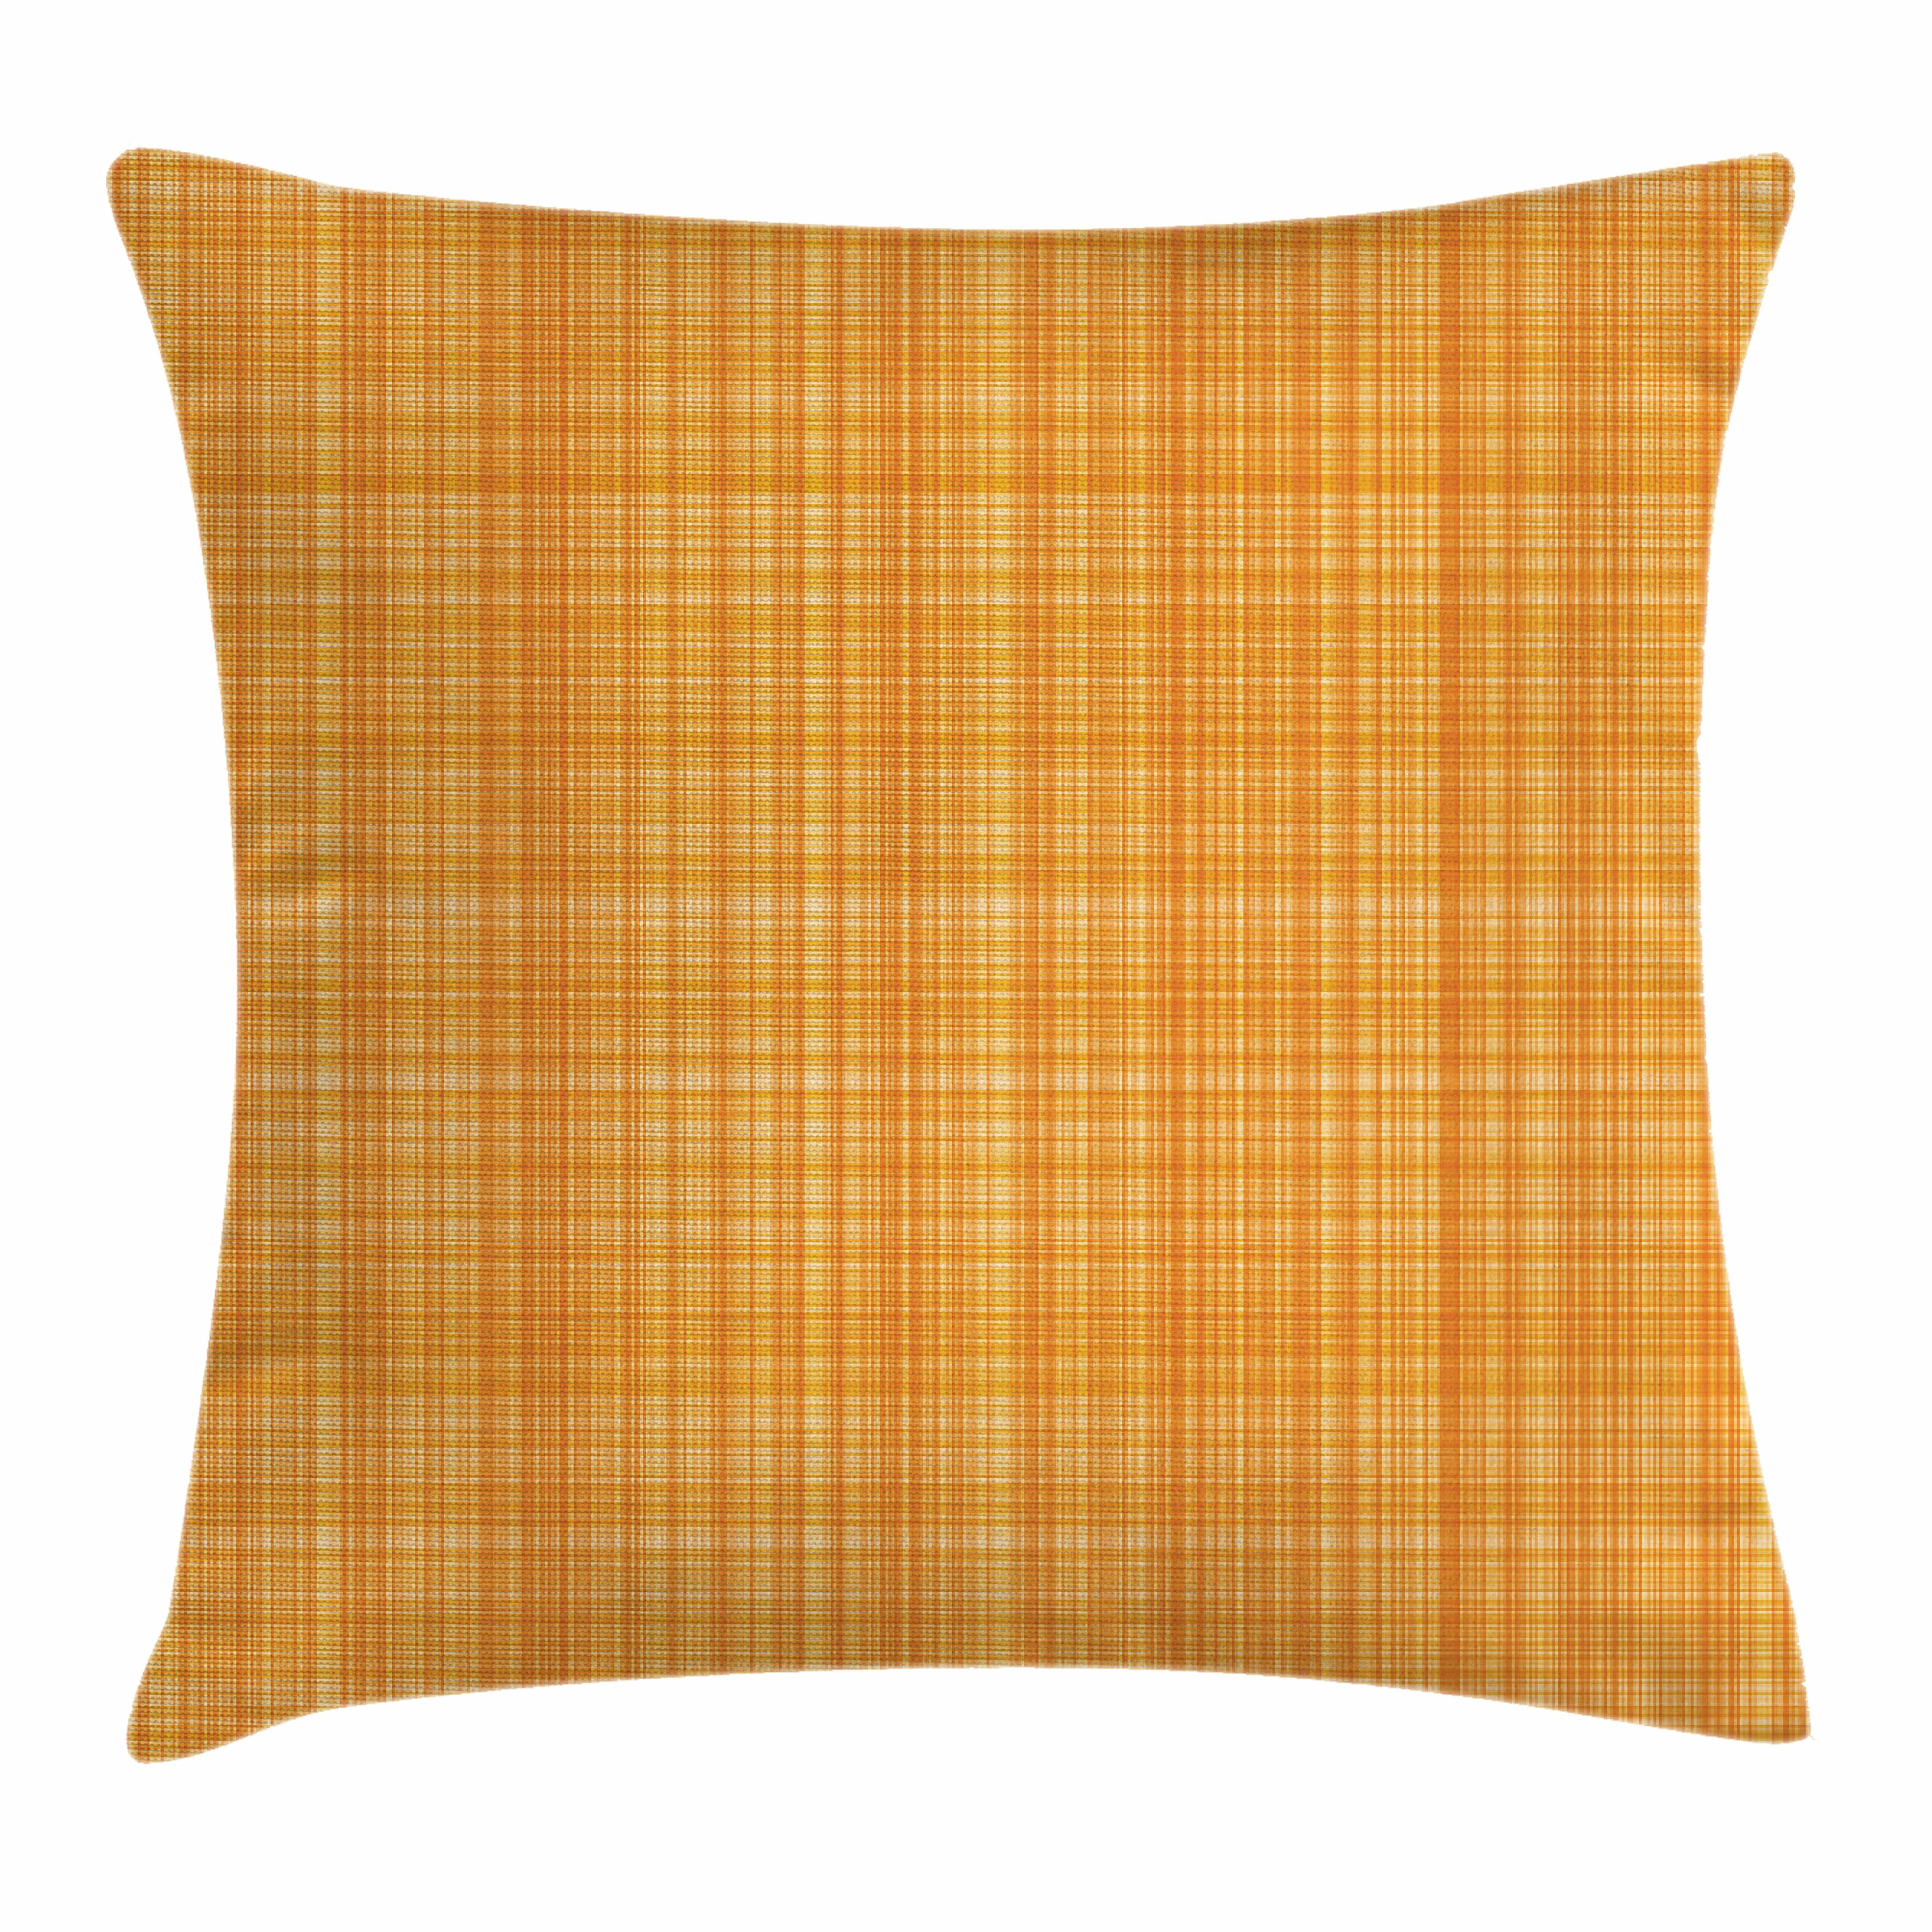 Orange Throw Pillow Cushion Cover, Striped Fiber Texture Image Abstract ...